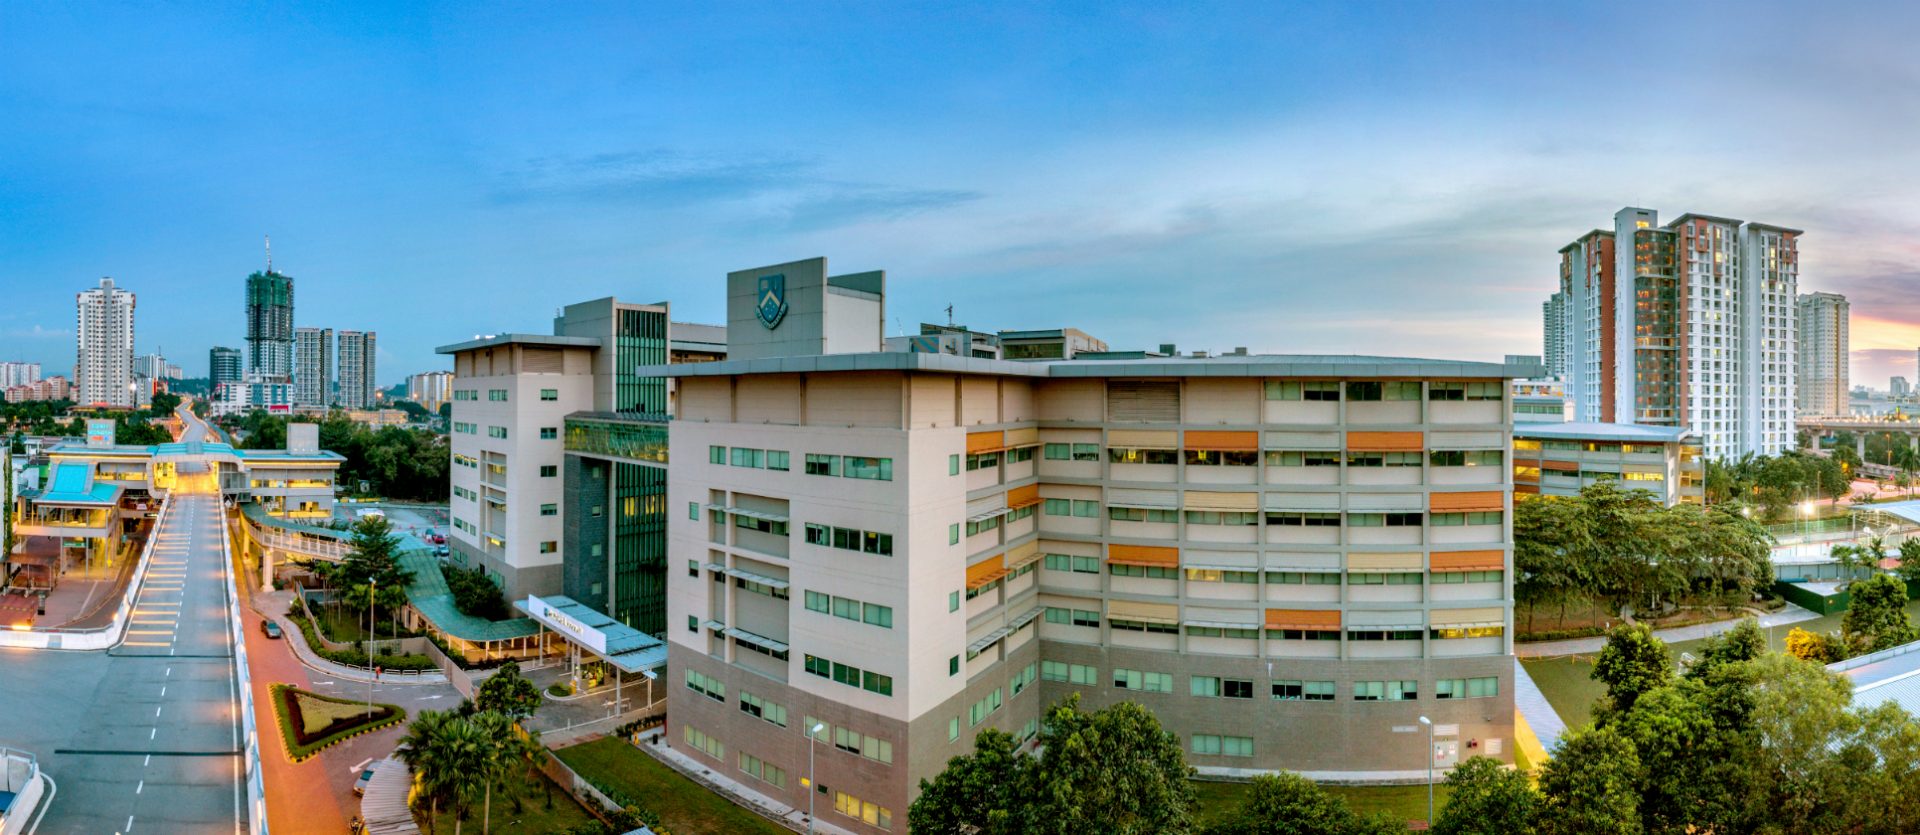 Monash University Malaysia Fees / Profile Monash University Malaysia (MUSM) - Where To Study ... - Monash university malaysia, the malaysian campus of monash university opened in 1998 and is located within the bandar sunway township in malaysia.